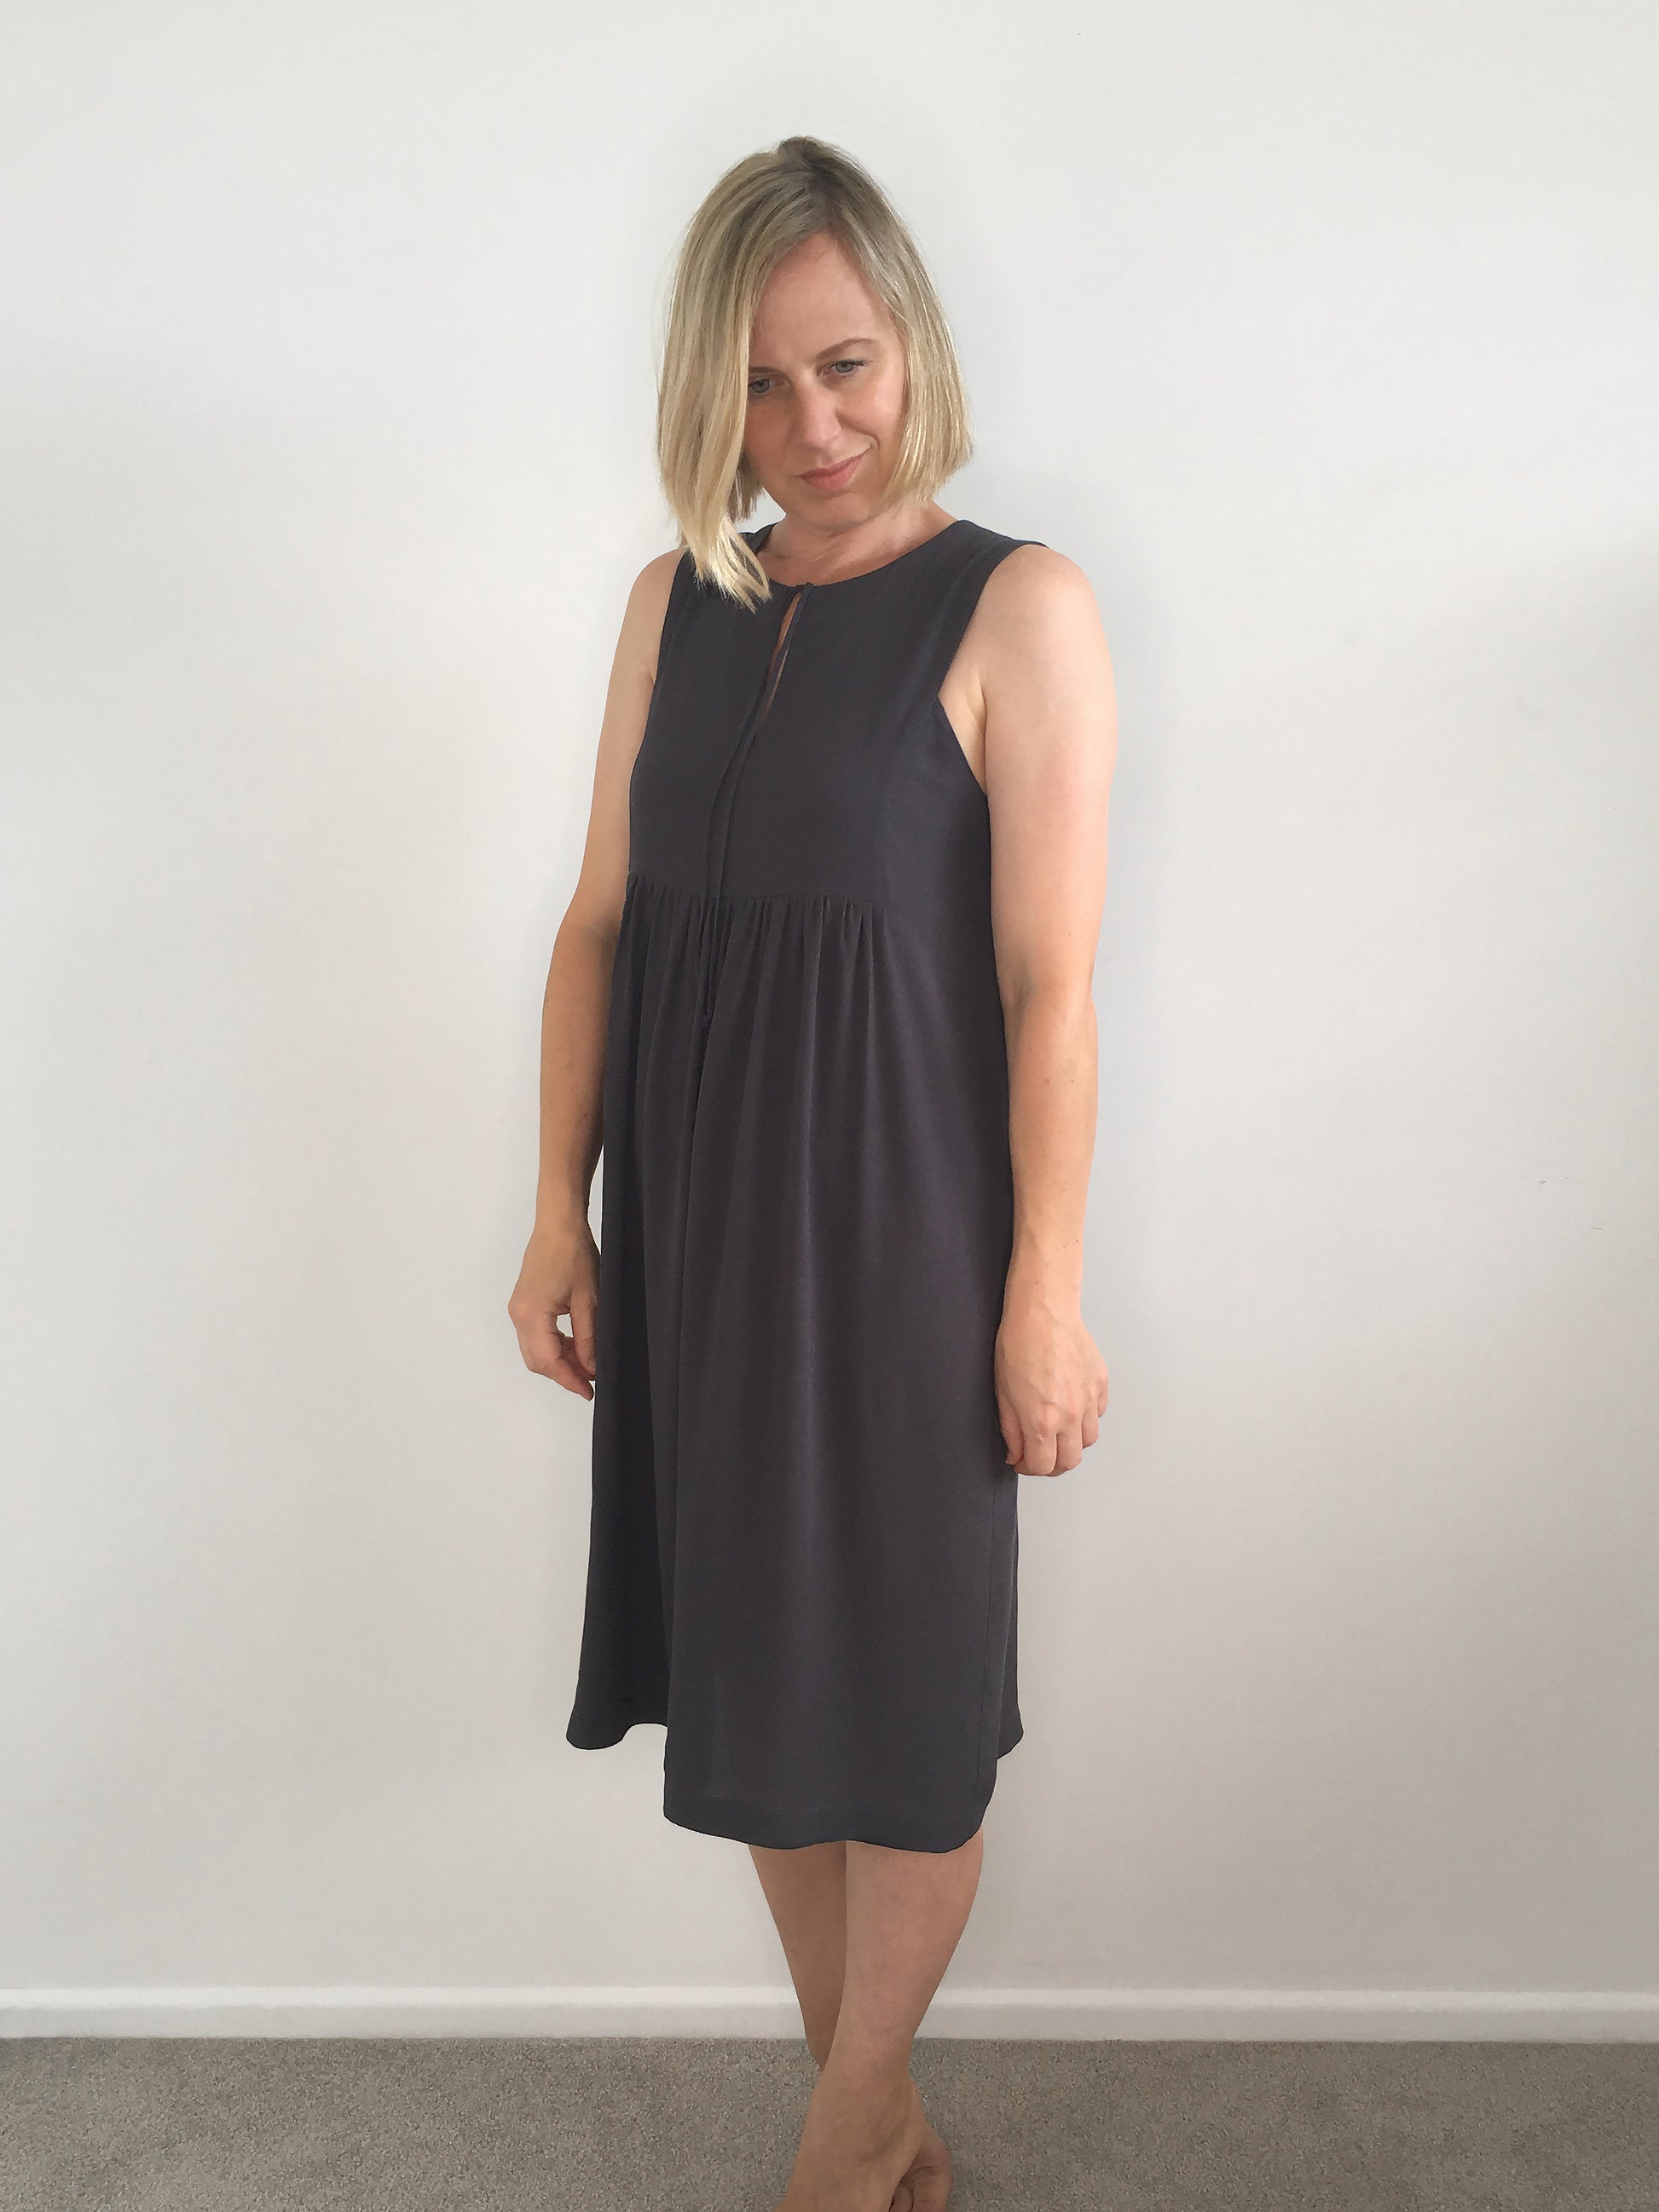 A woman wears a knee-length dark grey sleeveless viscose dress with front tie & gathered skirt.